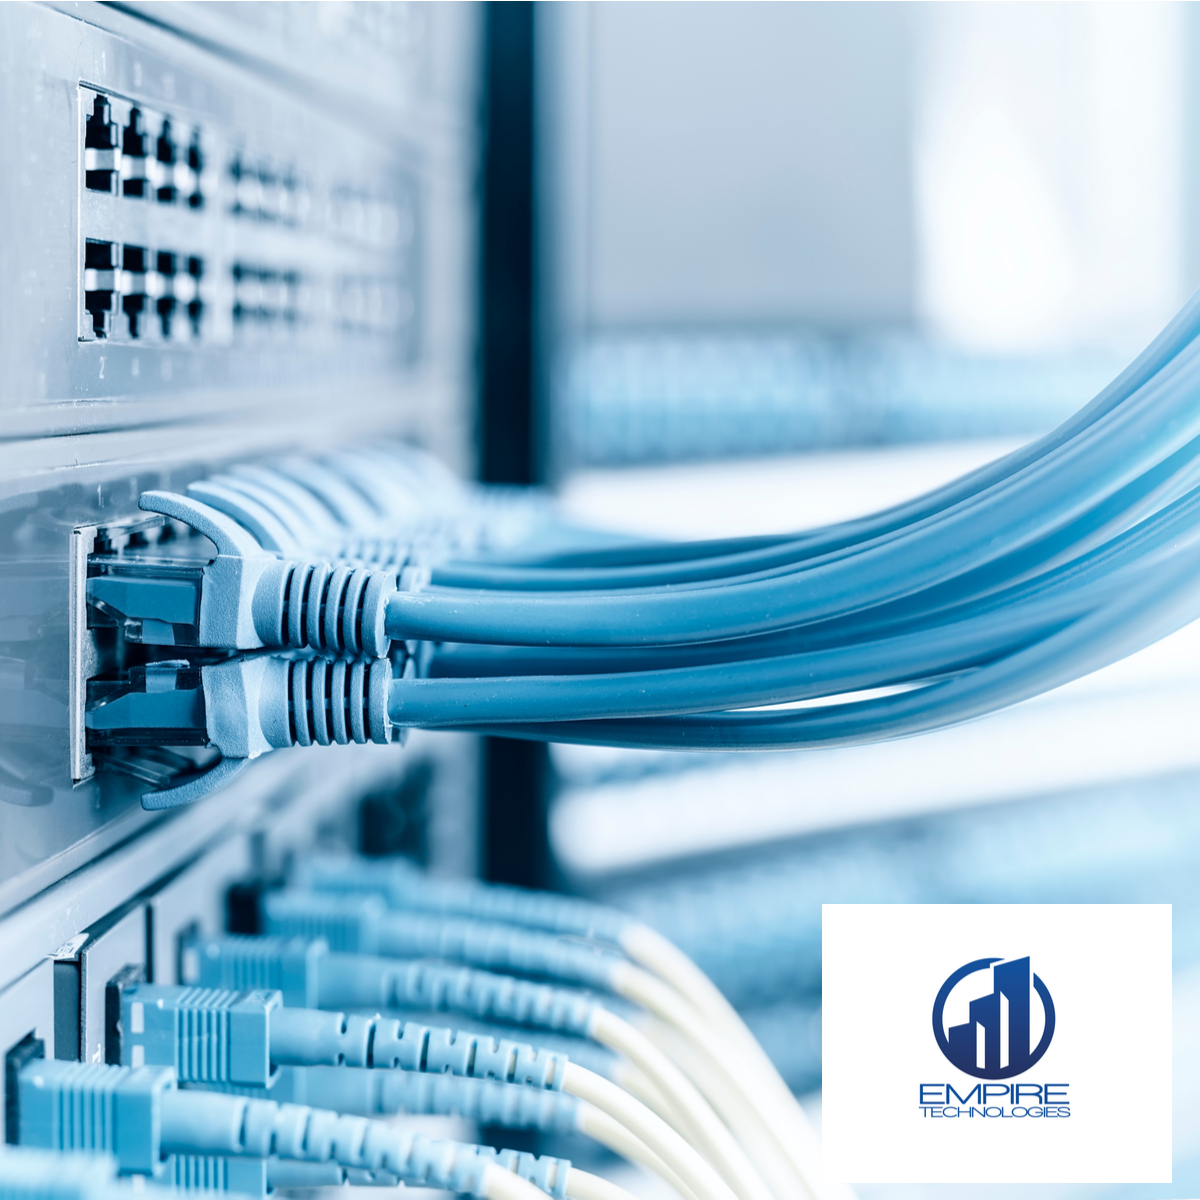 Network IT & Cabling Systems Could Better Your Business Connectivity and Performance!